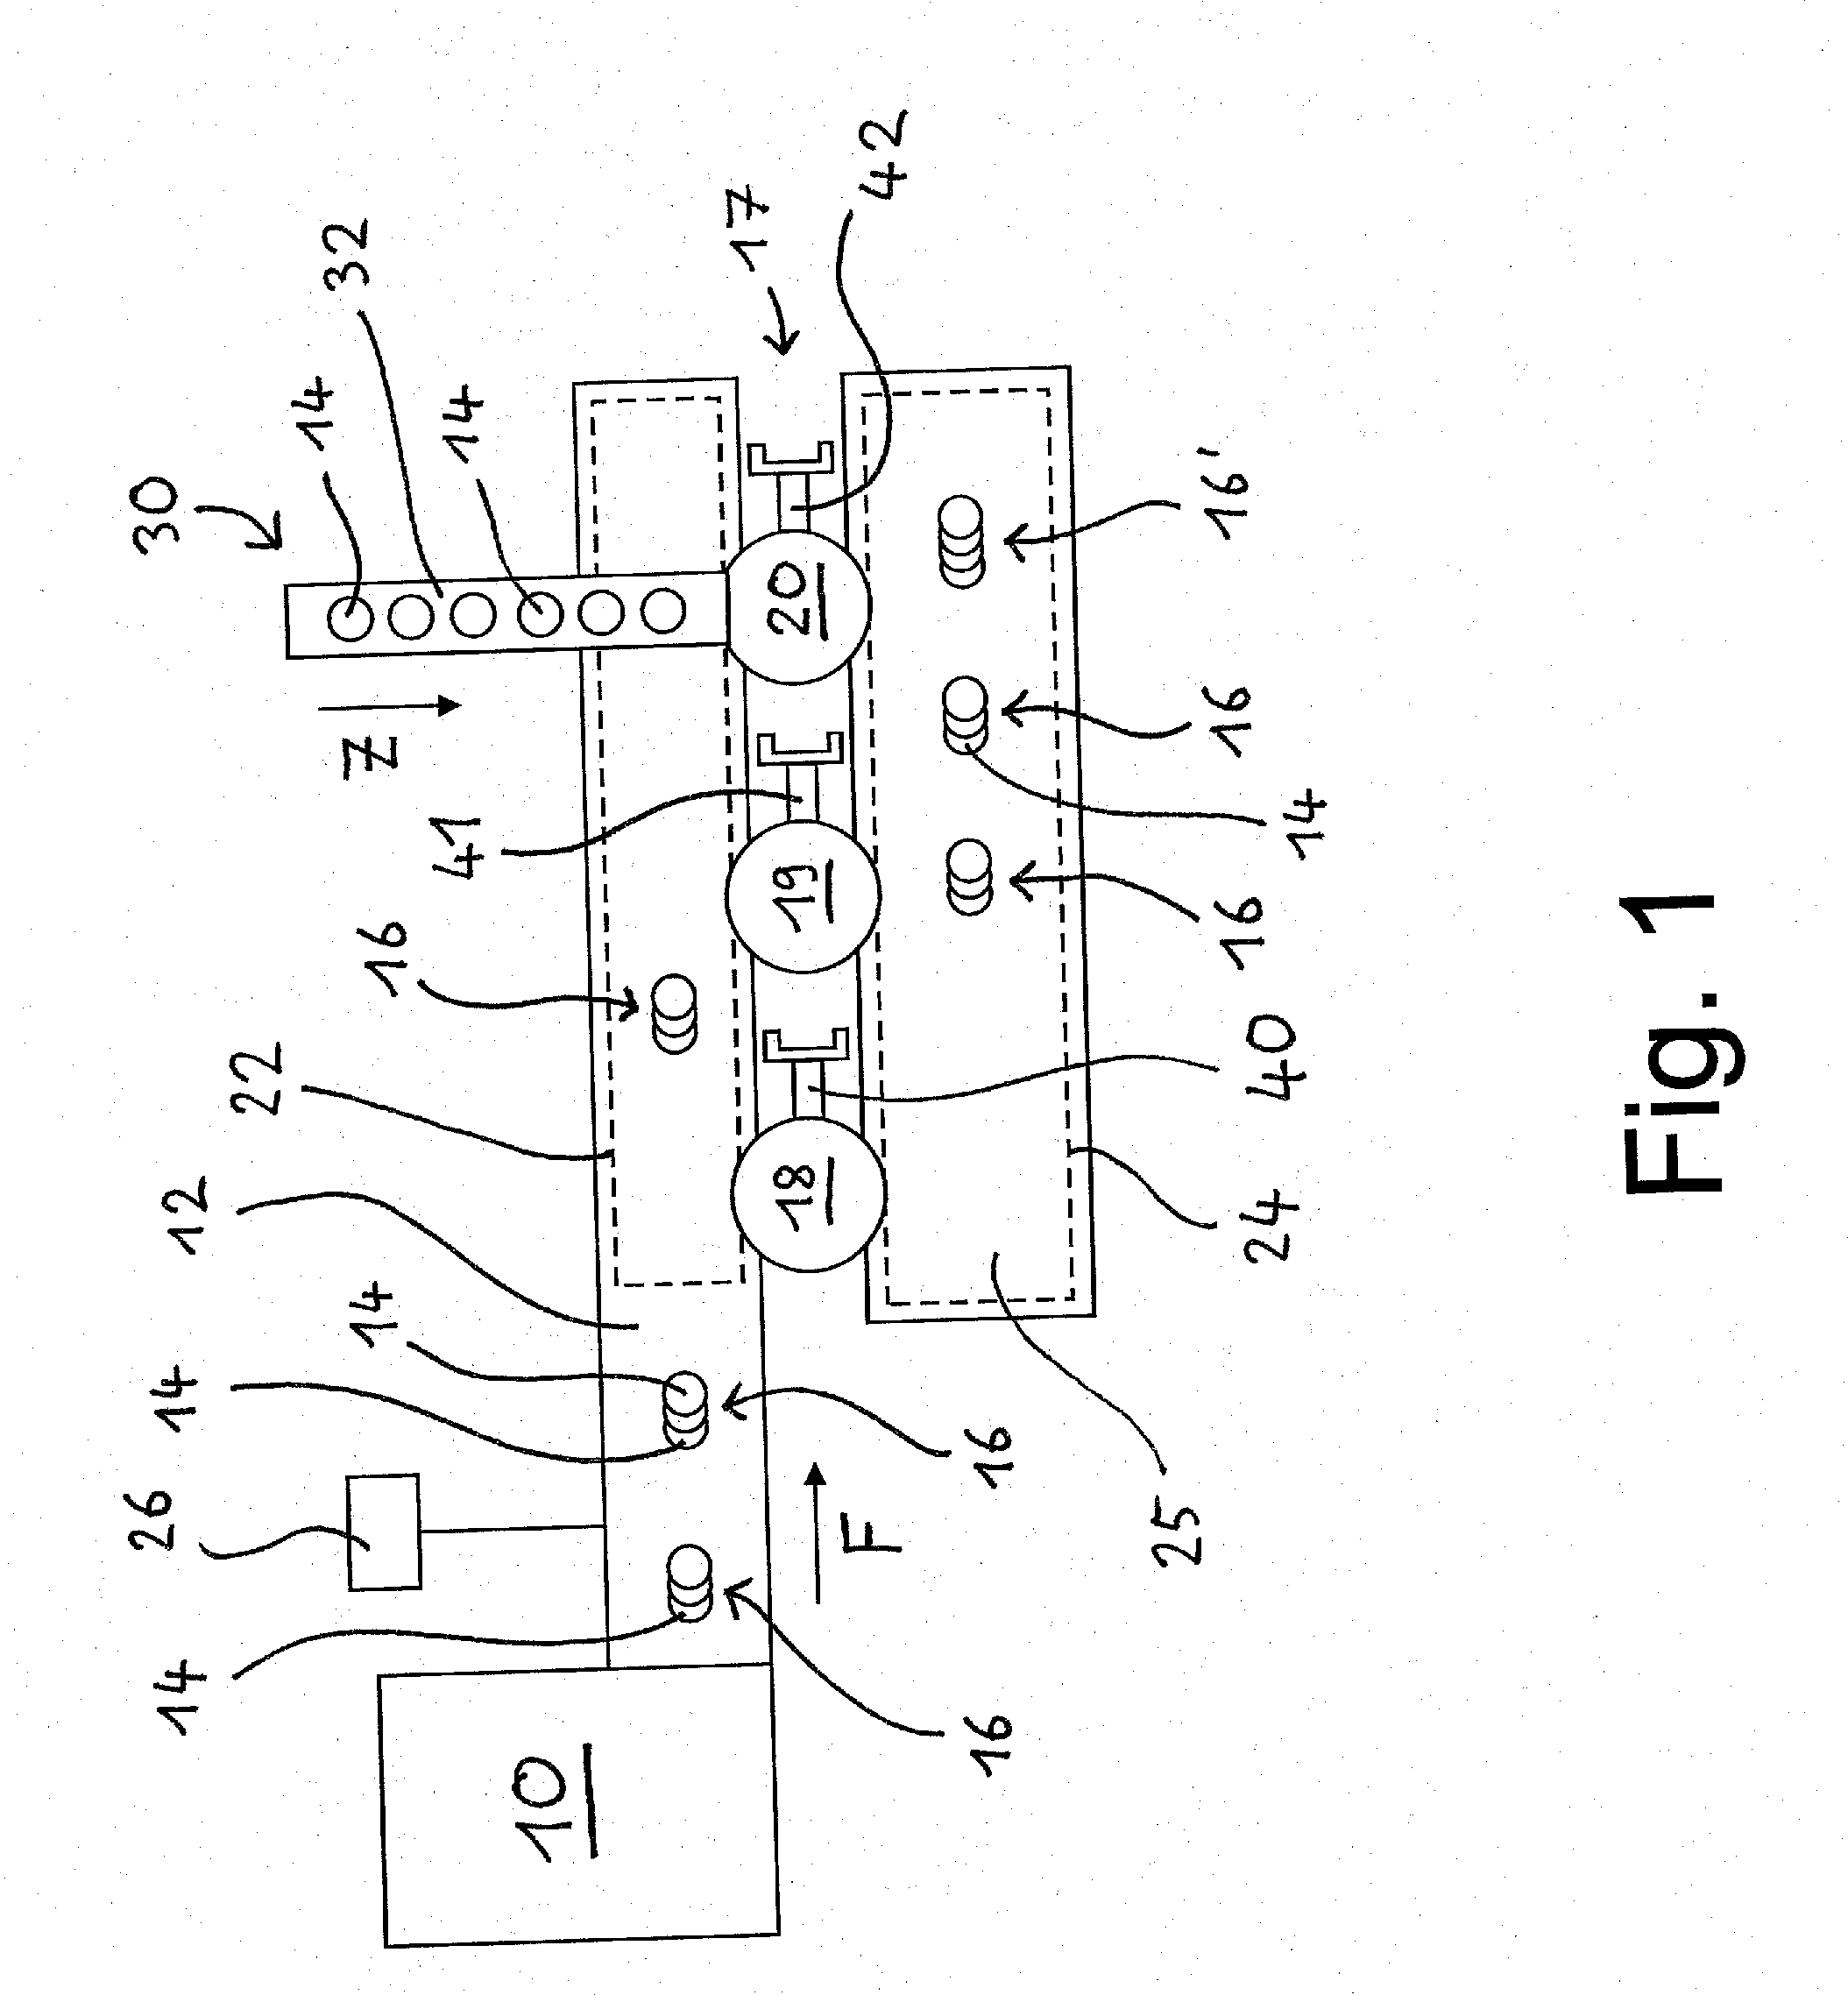 Apparatus for handling portions of products